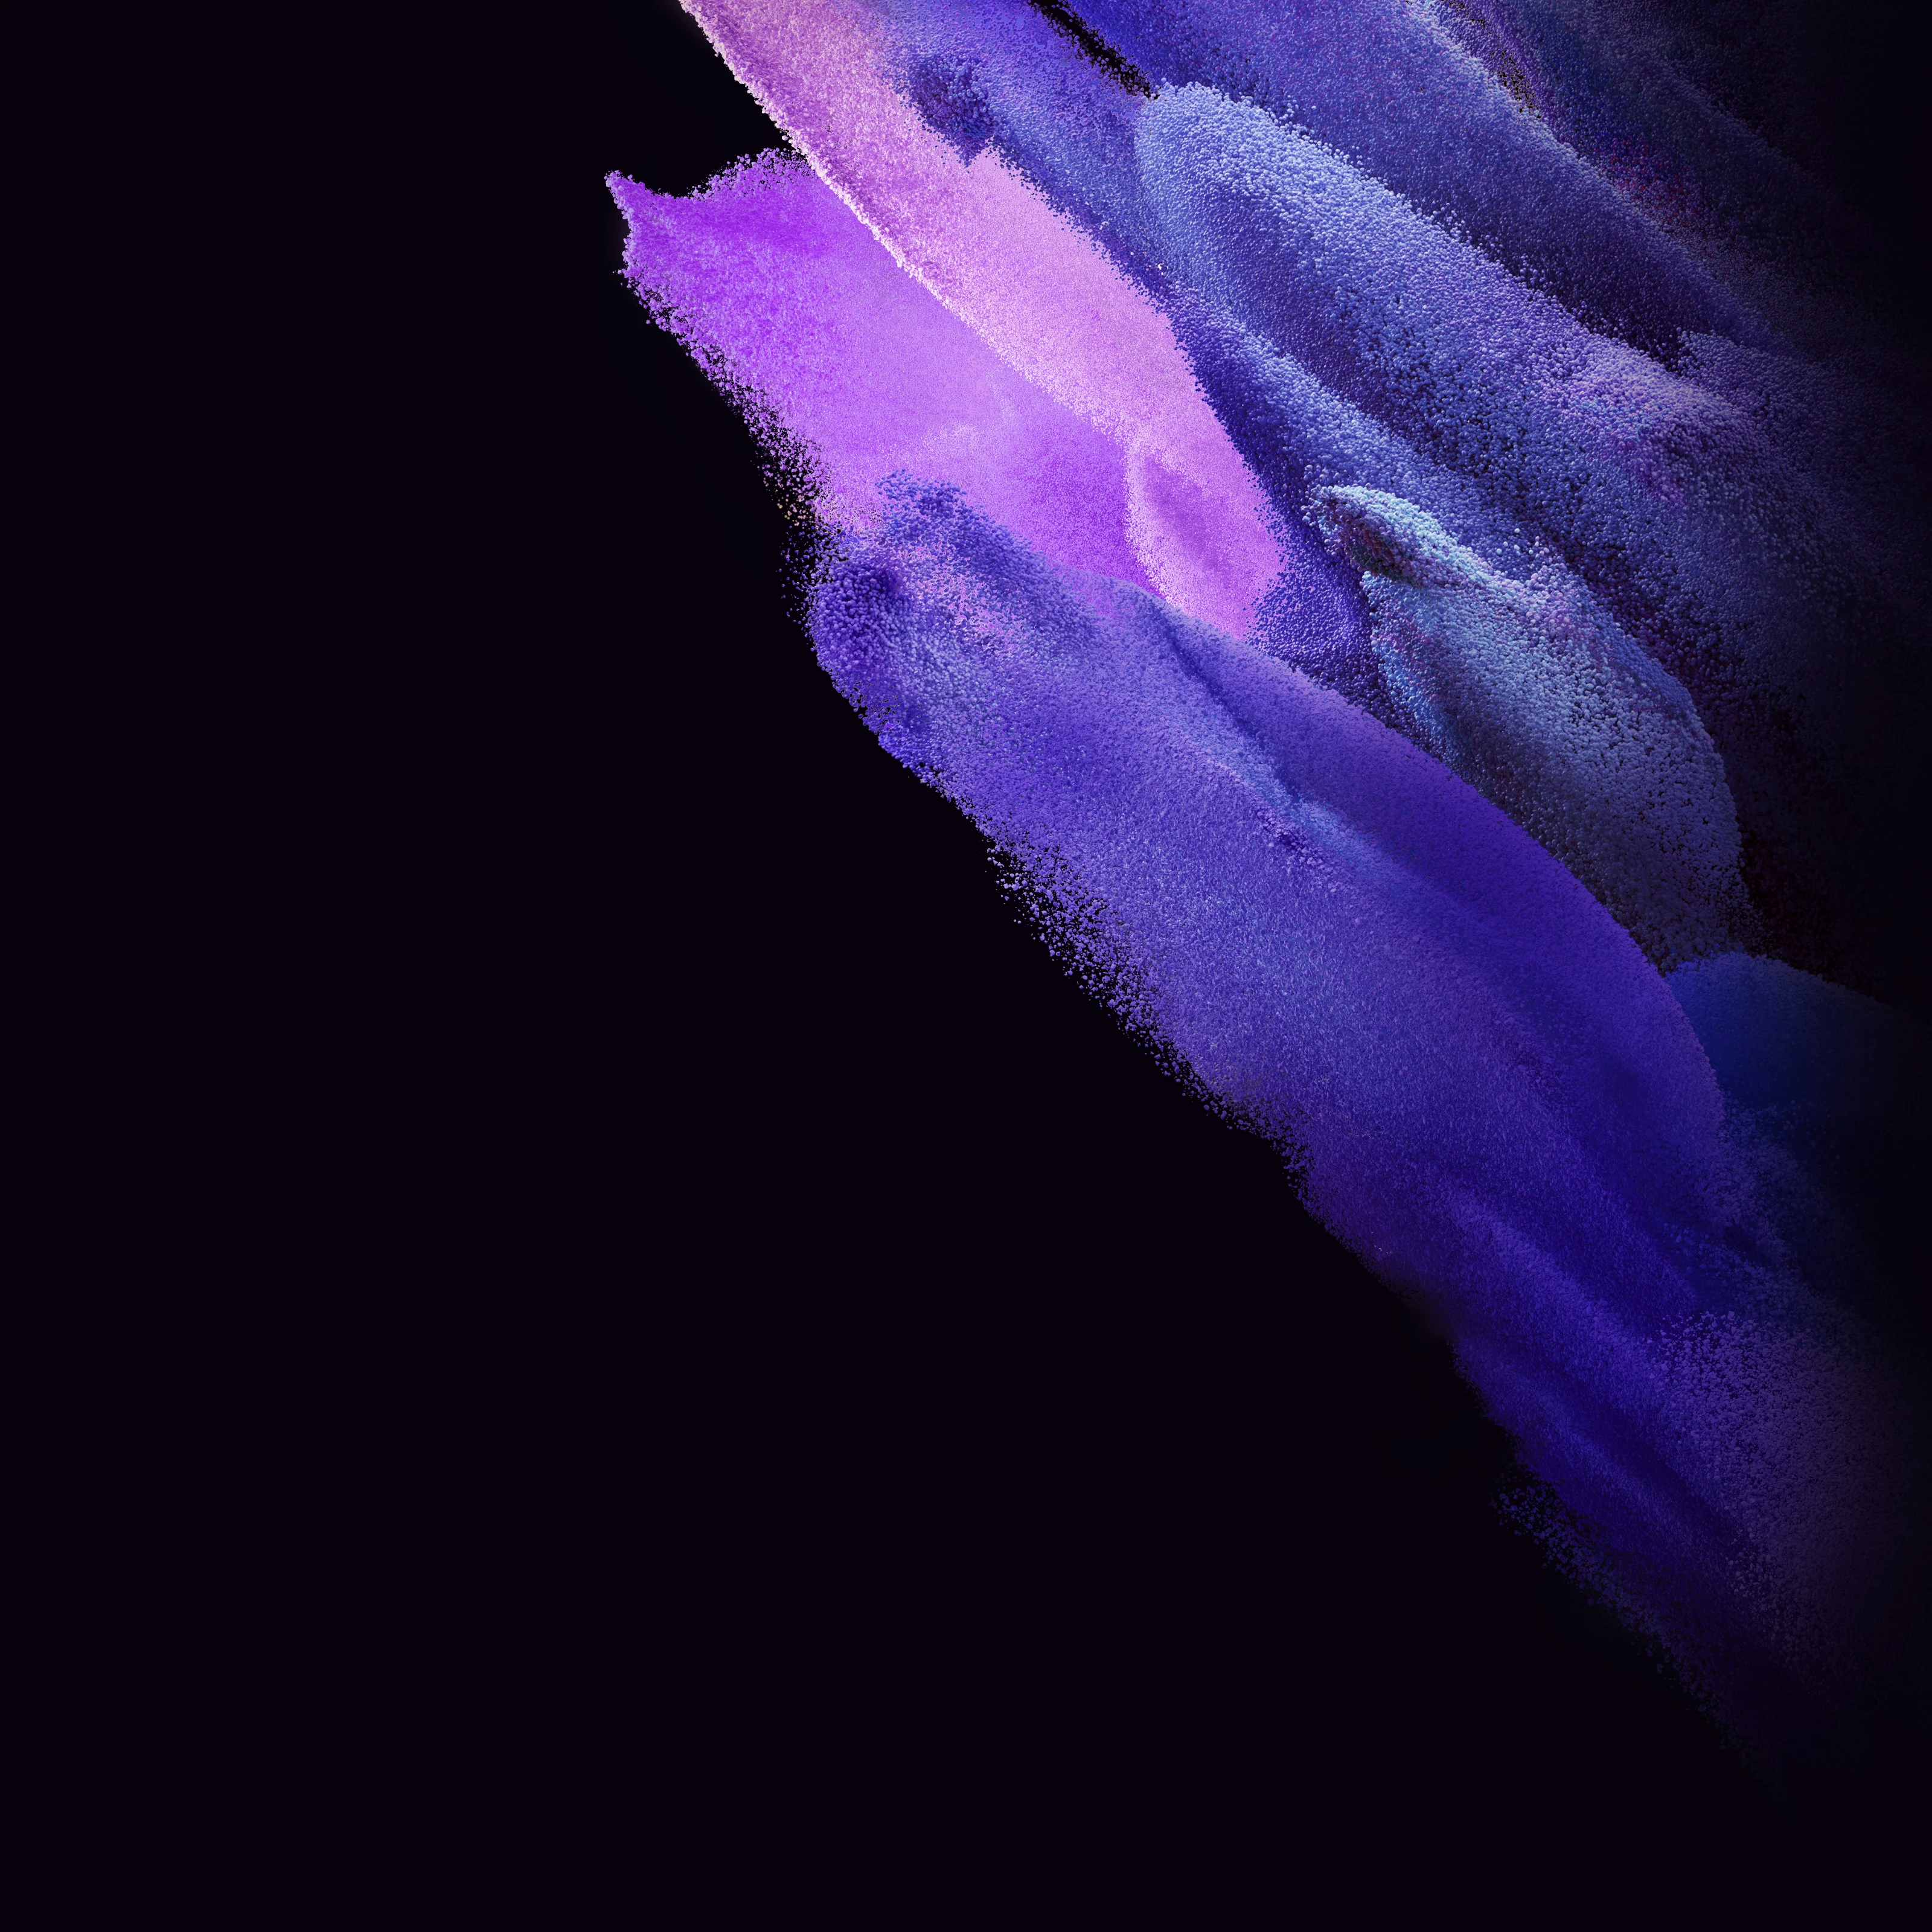 Samsung Galaxy S21 4K Wallpaper, Stock, AMOLED, Particles, Purple, Pink, Black background, Abstract